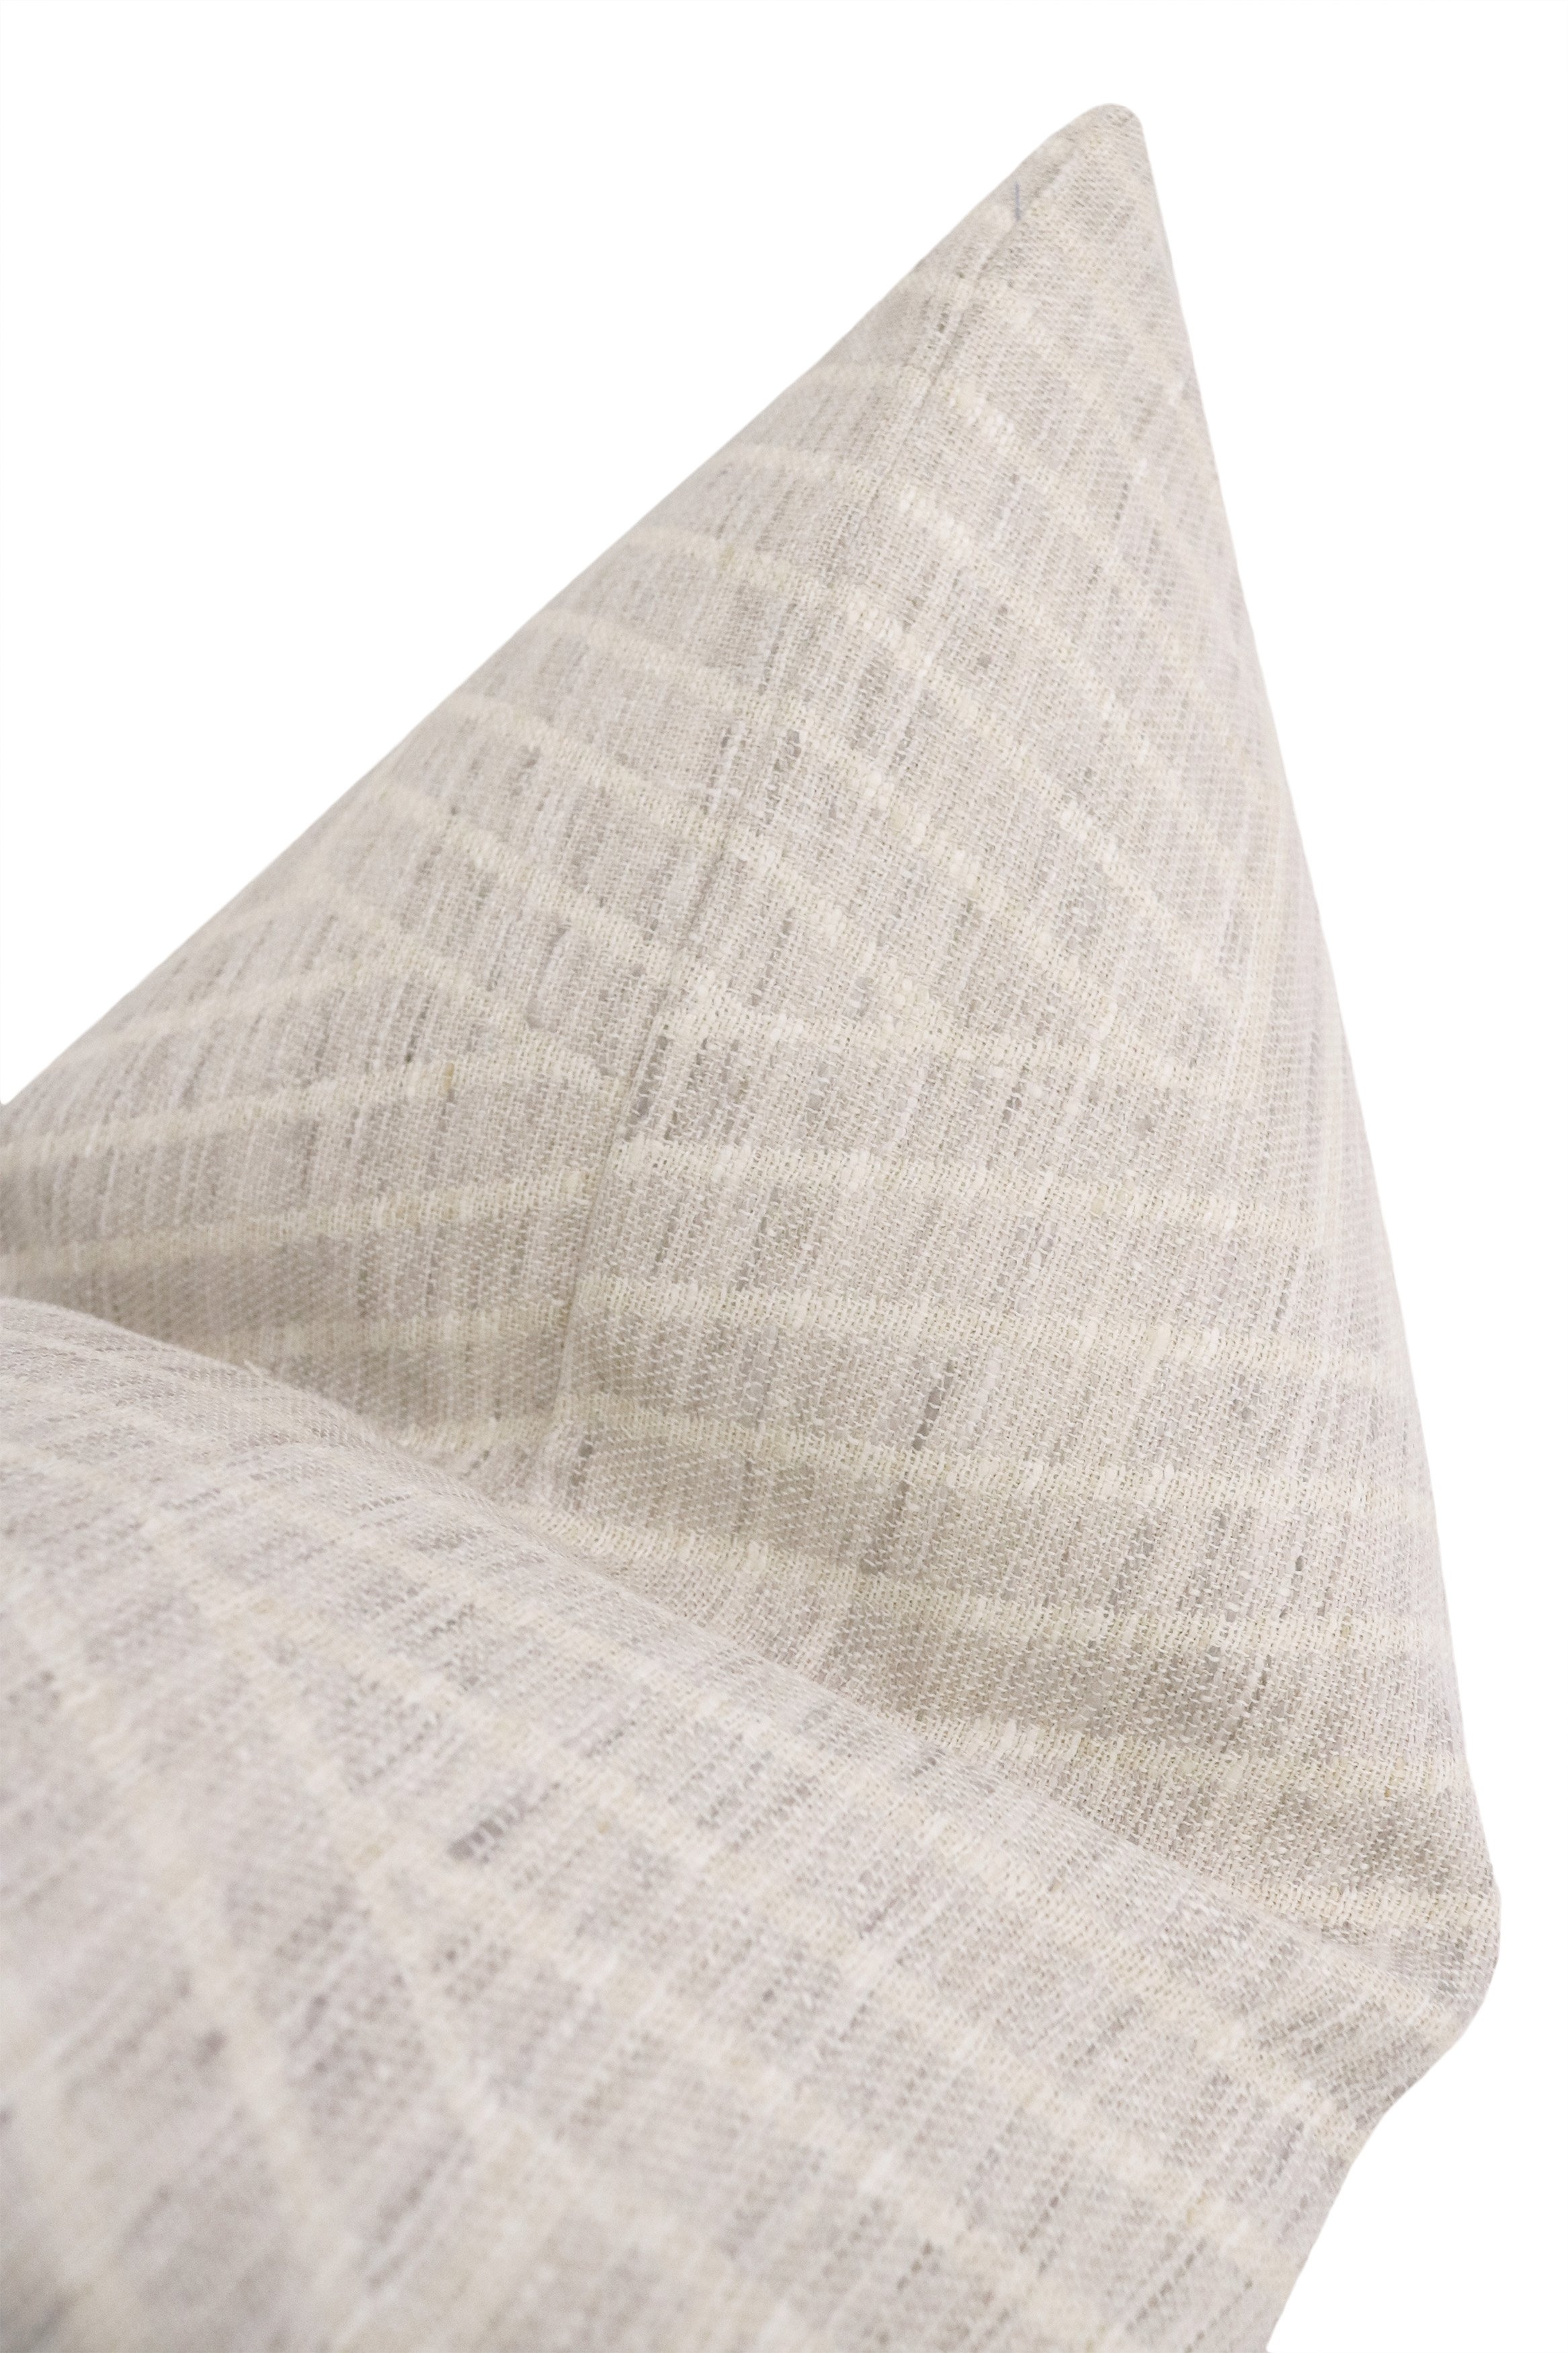 LABYRINTH LINEN // OYSTER - 18" X 18" - Image 2